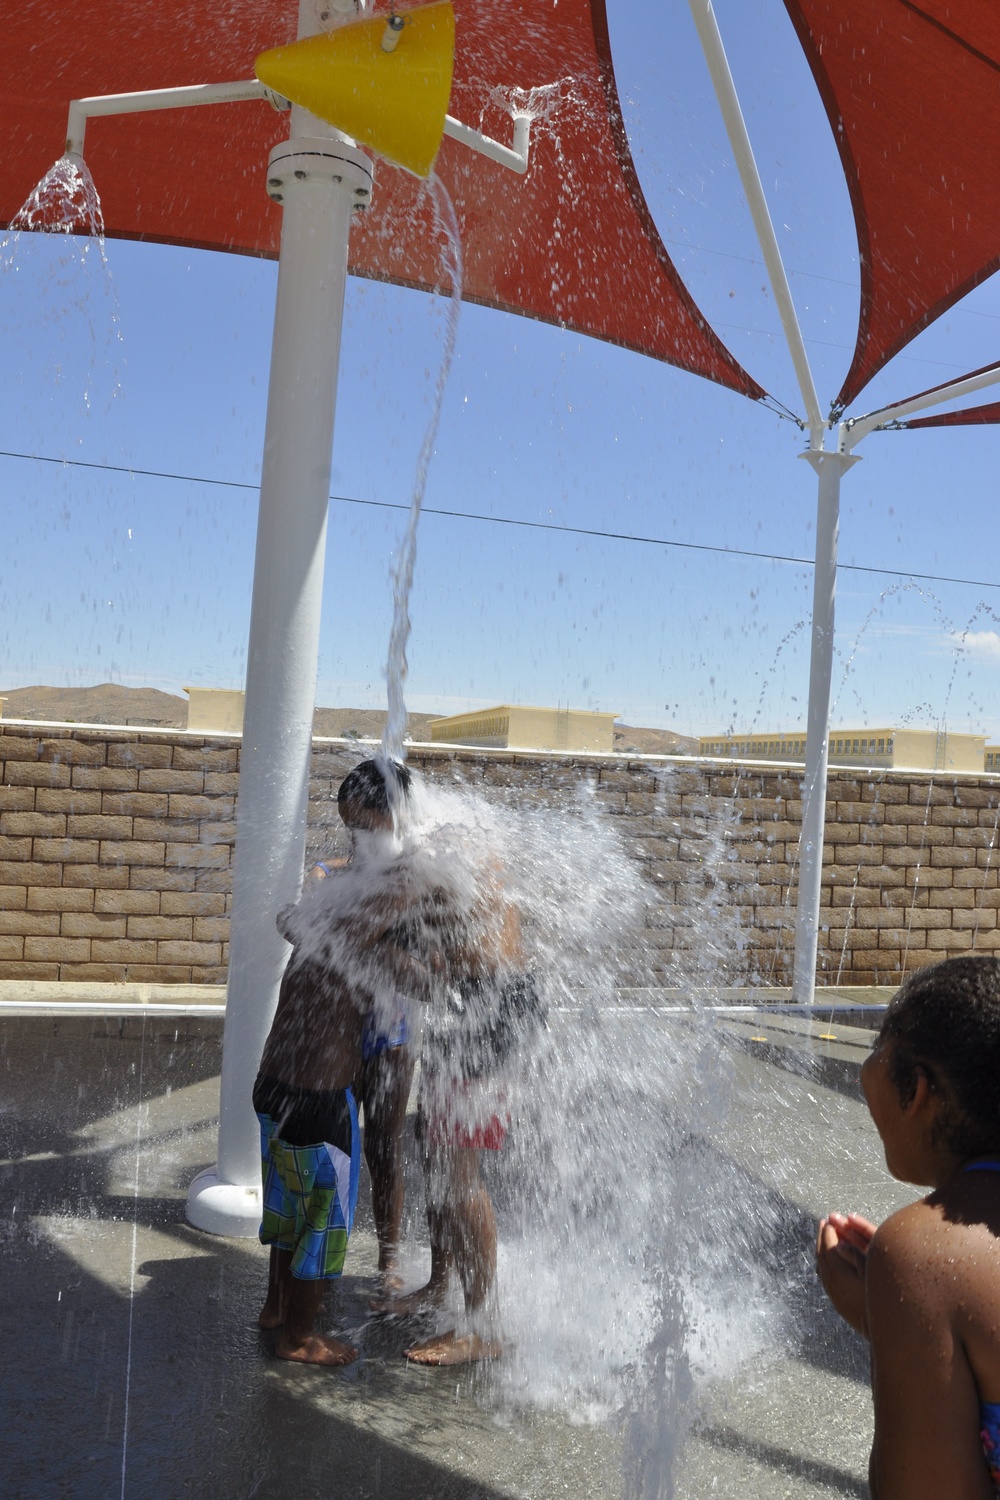 Children of military service members huddle together in anticipation of a bucket of water about to douse them at the Oasis Pool and Water Park aboard Marine Corps Logistics Base Barstow, Calif., during the All American BBQ, July 4